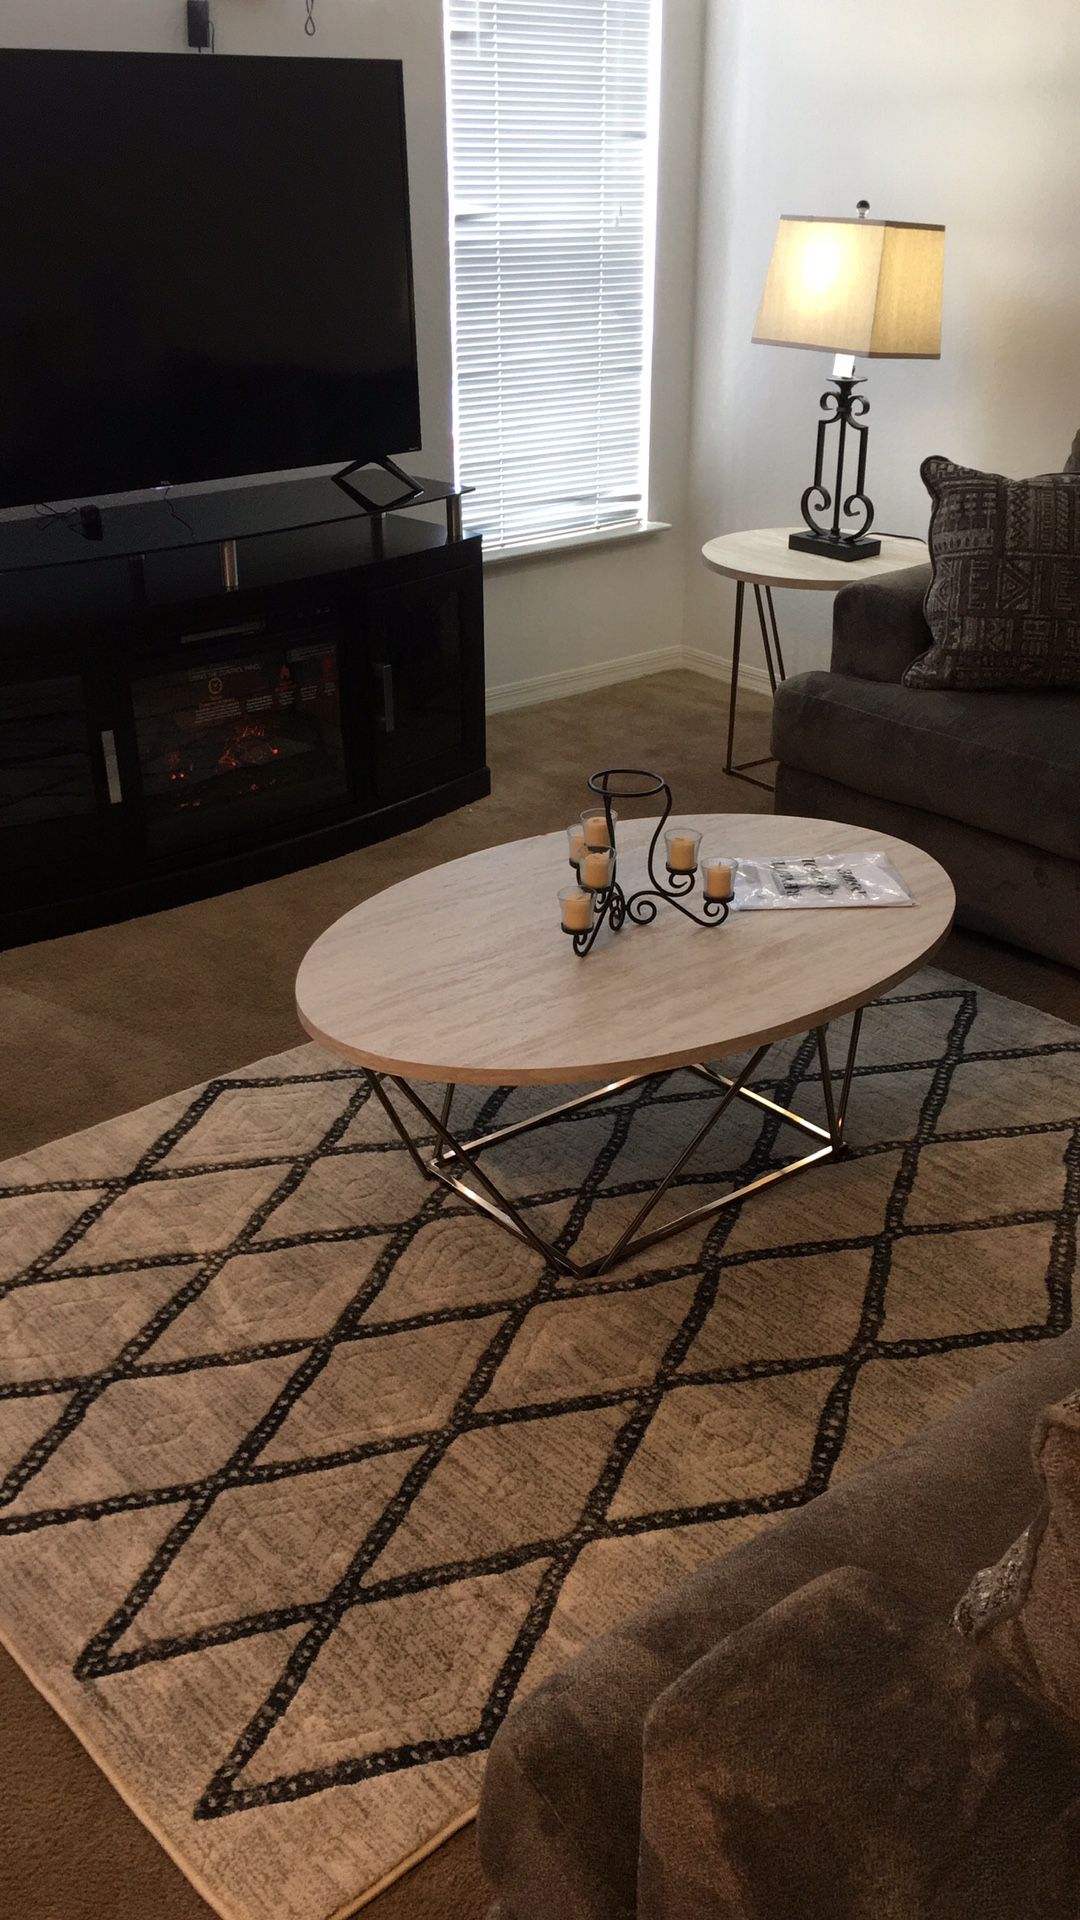 The item is a three-piece Center table